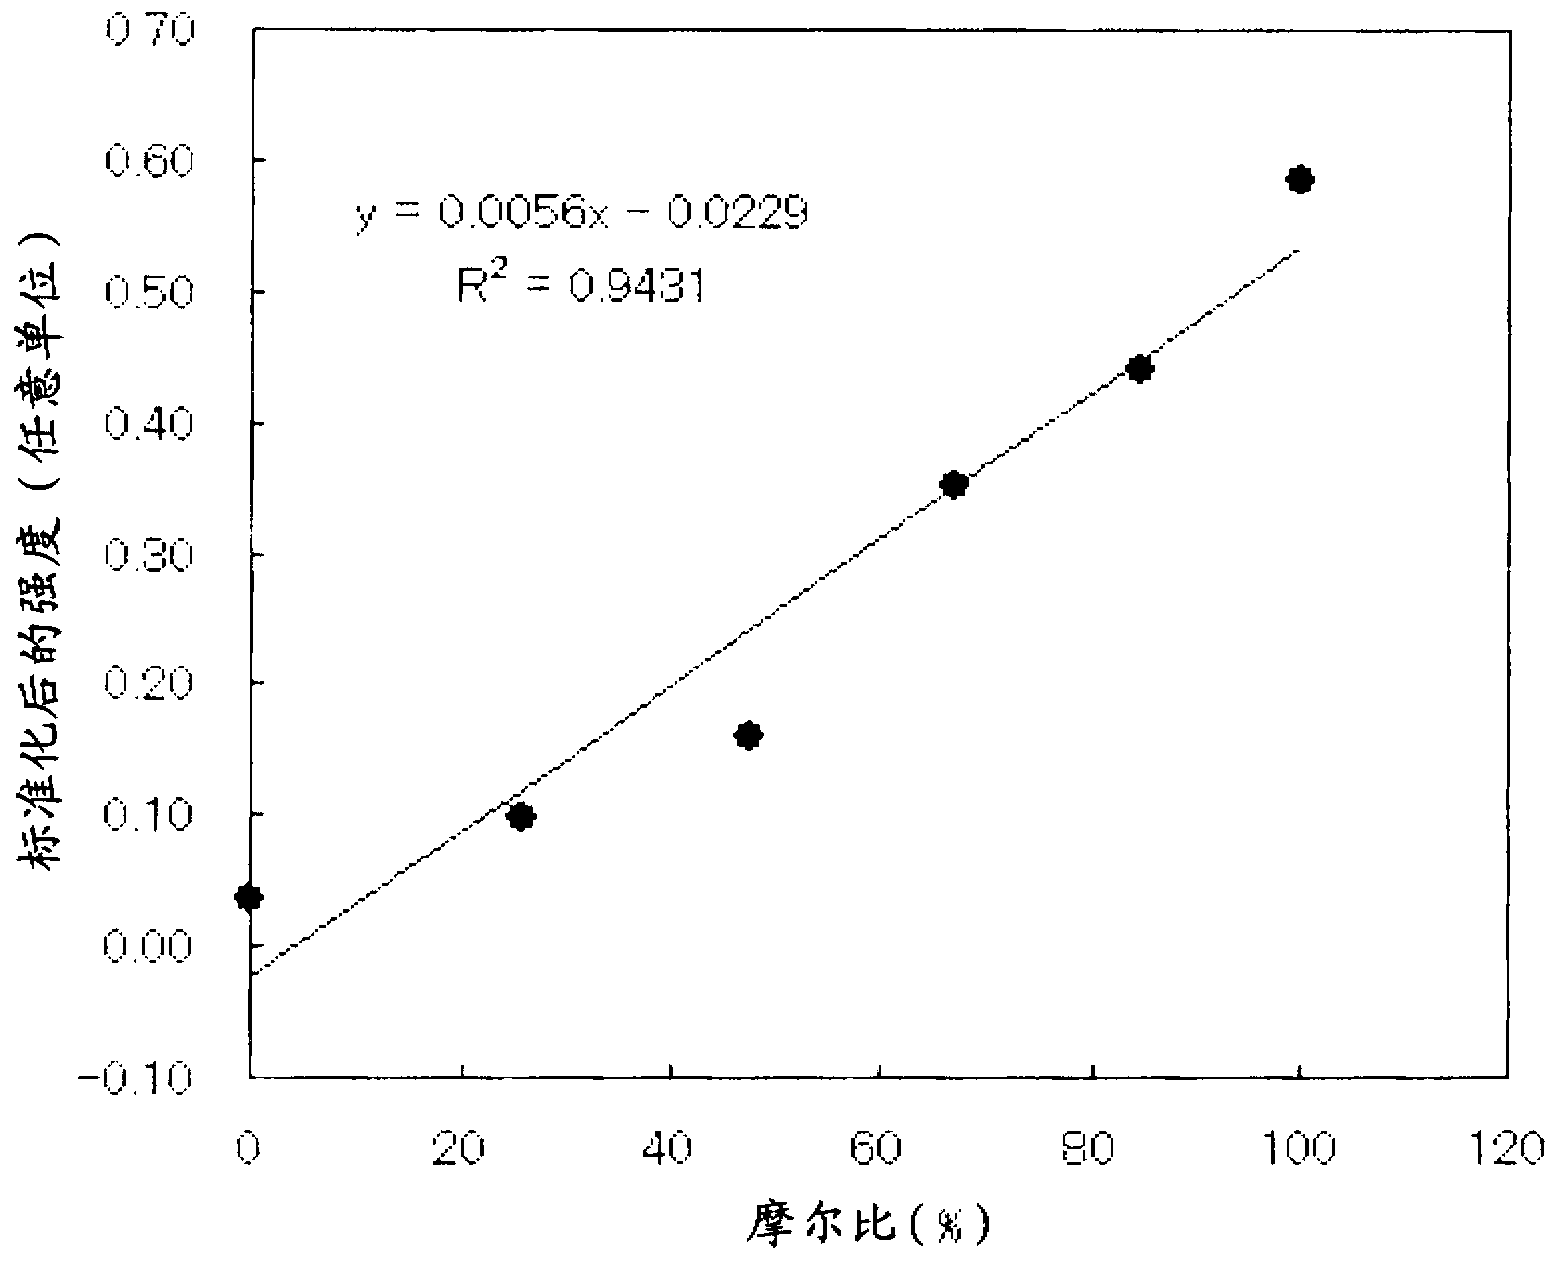 Titanium oxide photocatalyst having copper compounds supported thereon, and method for producing same